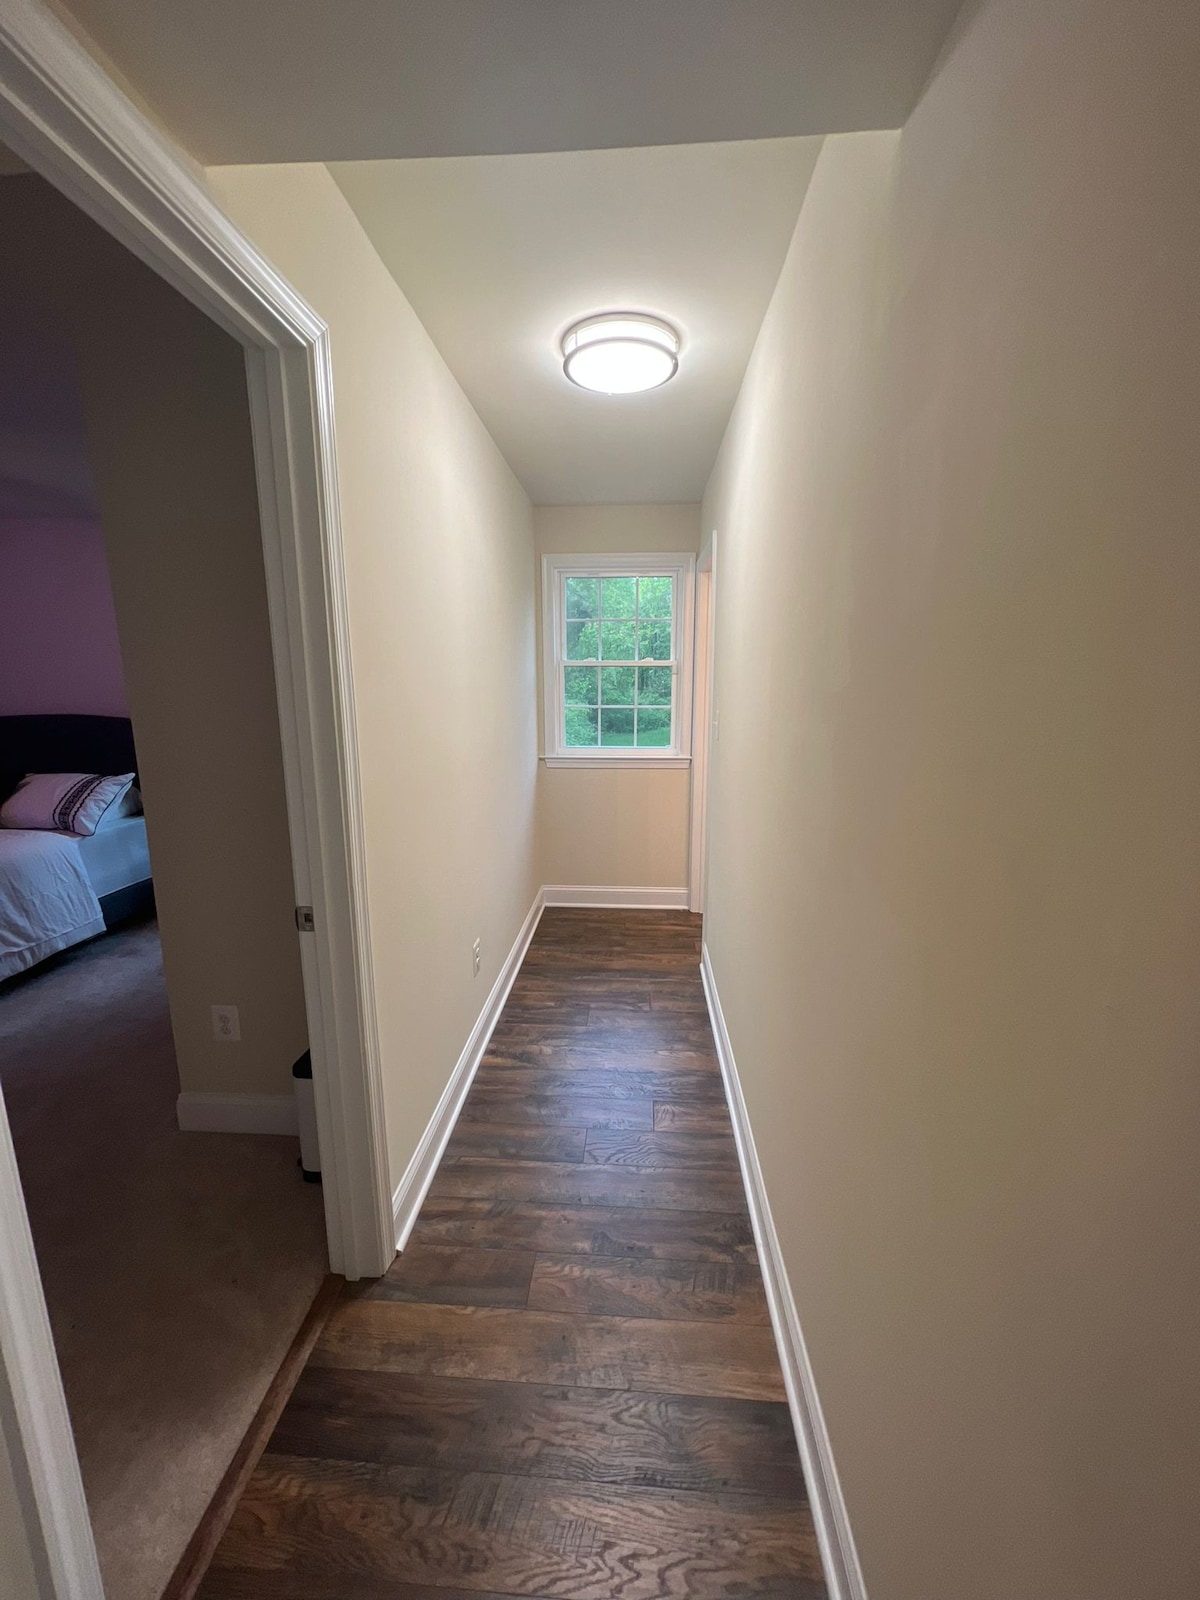 Private room and bath near Dulles Airport